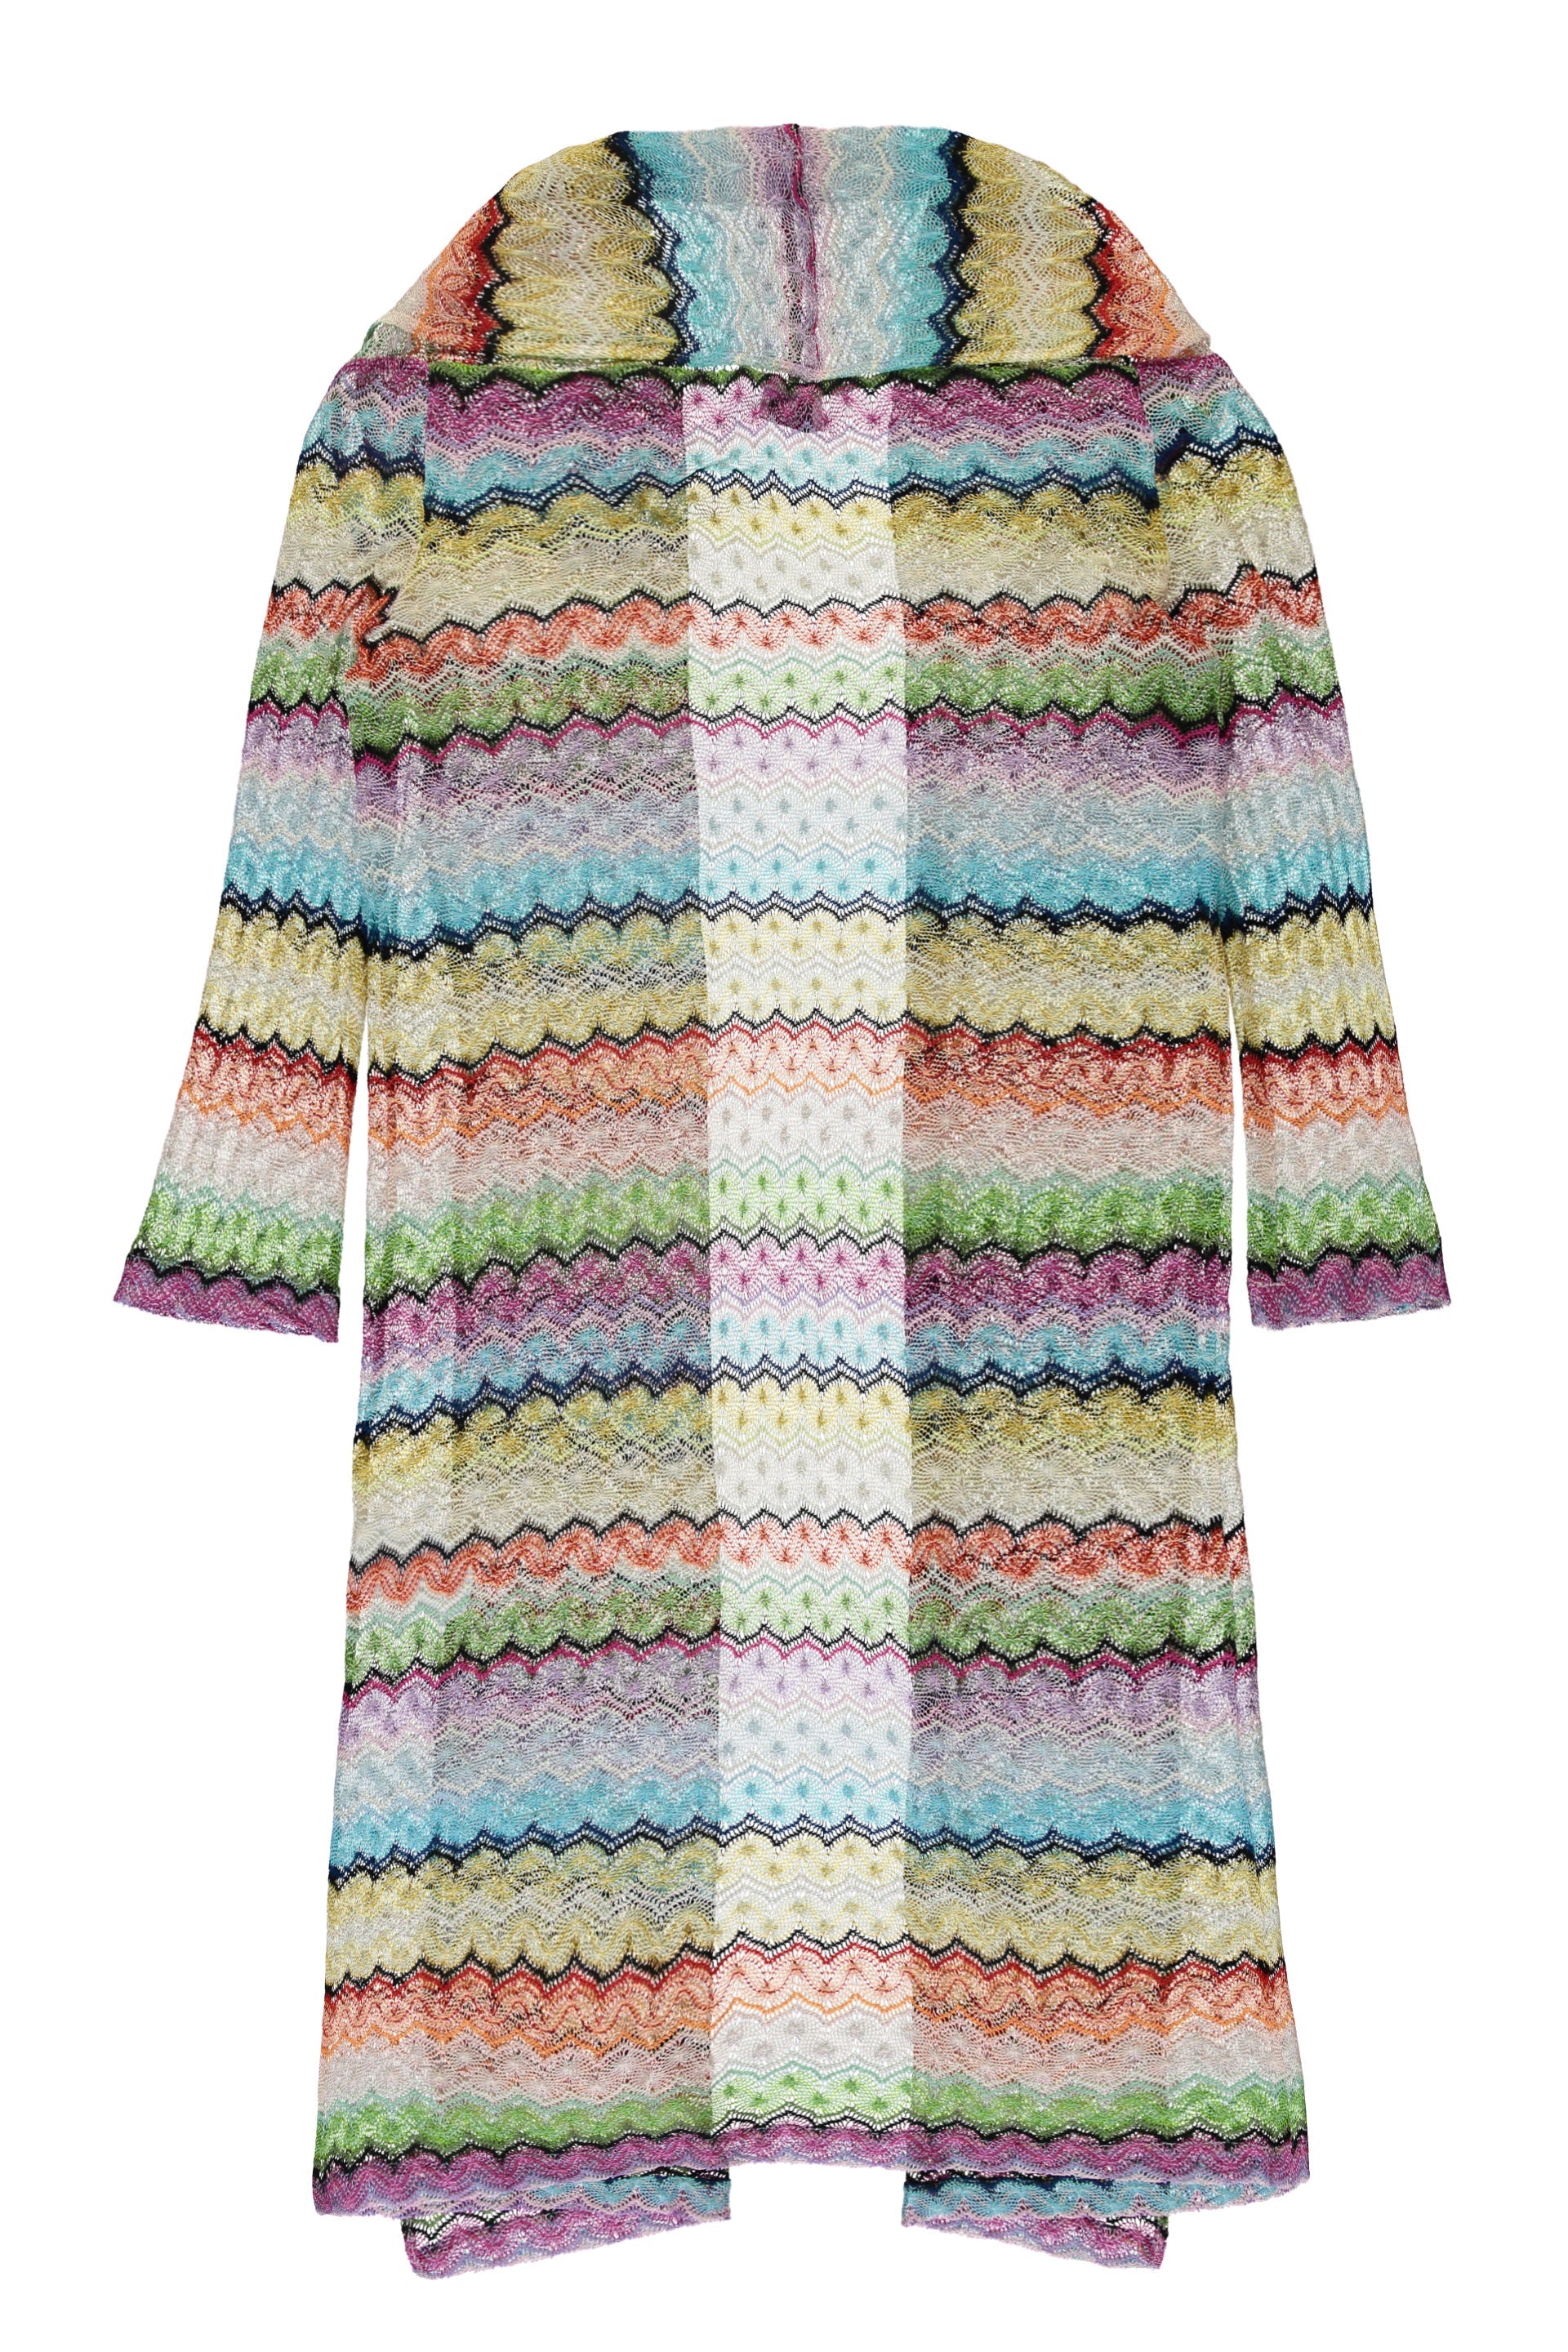 Knitted cover-up dress